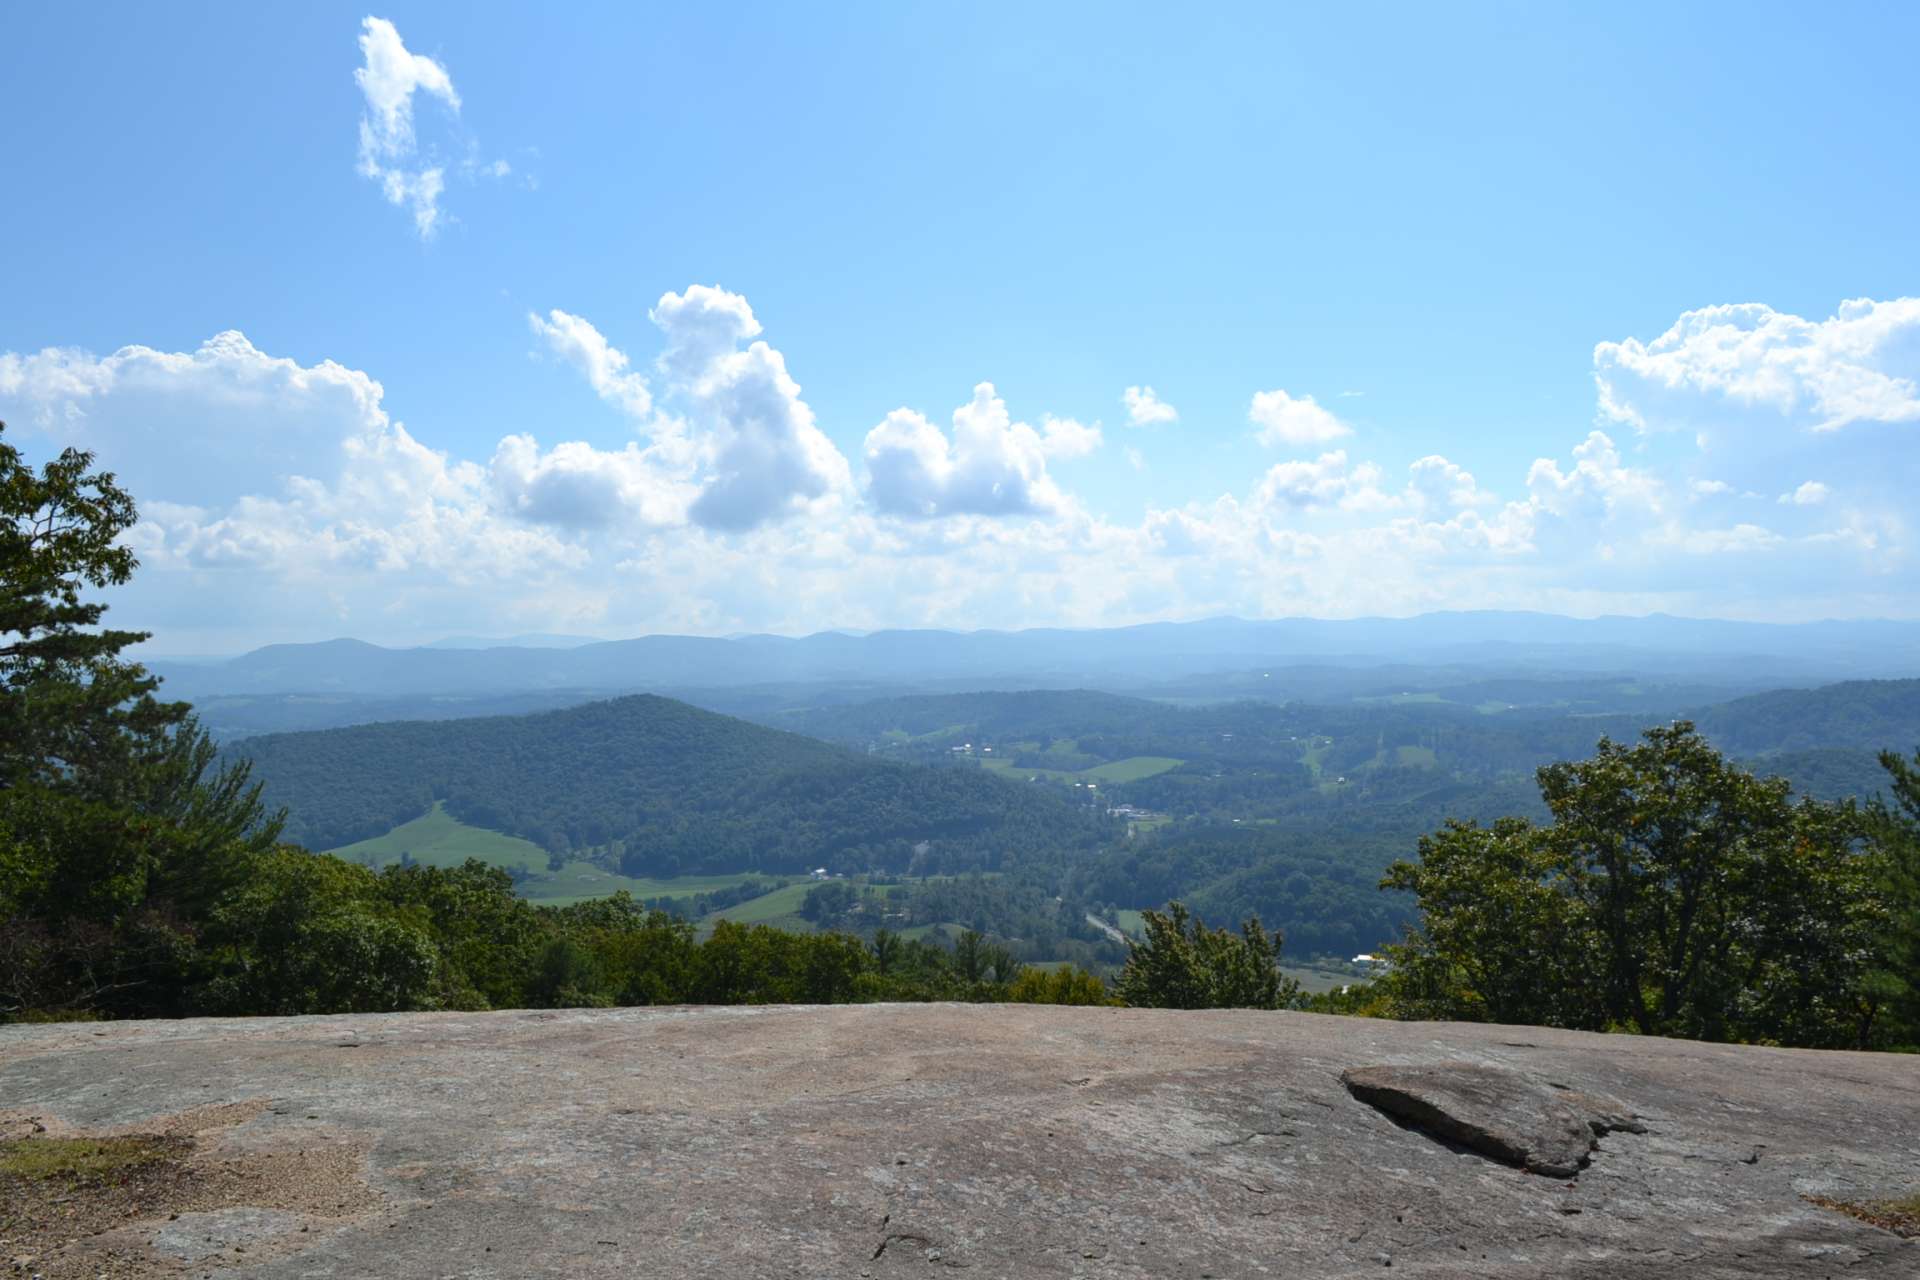 Point Lookout offers over 300 acres of natural area for residents to enjoy walking trails and expansive views. This view can be enjoyed as you travel Point Lookout Lane.